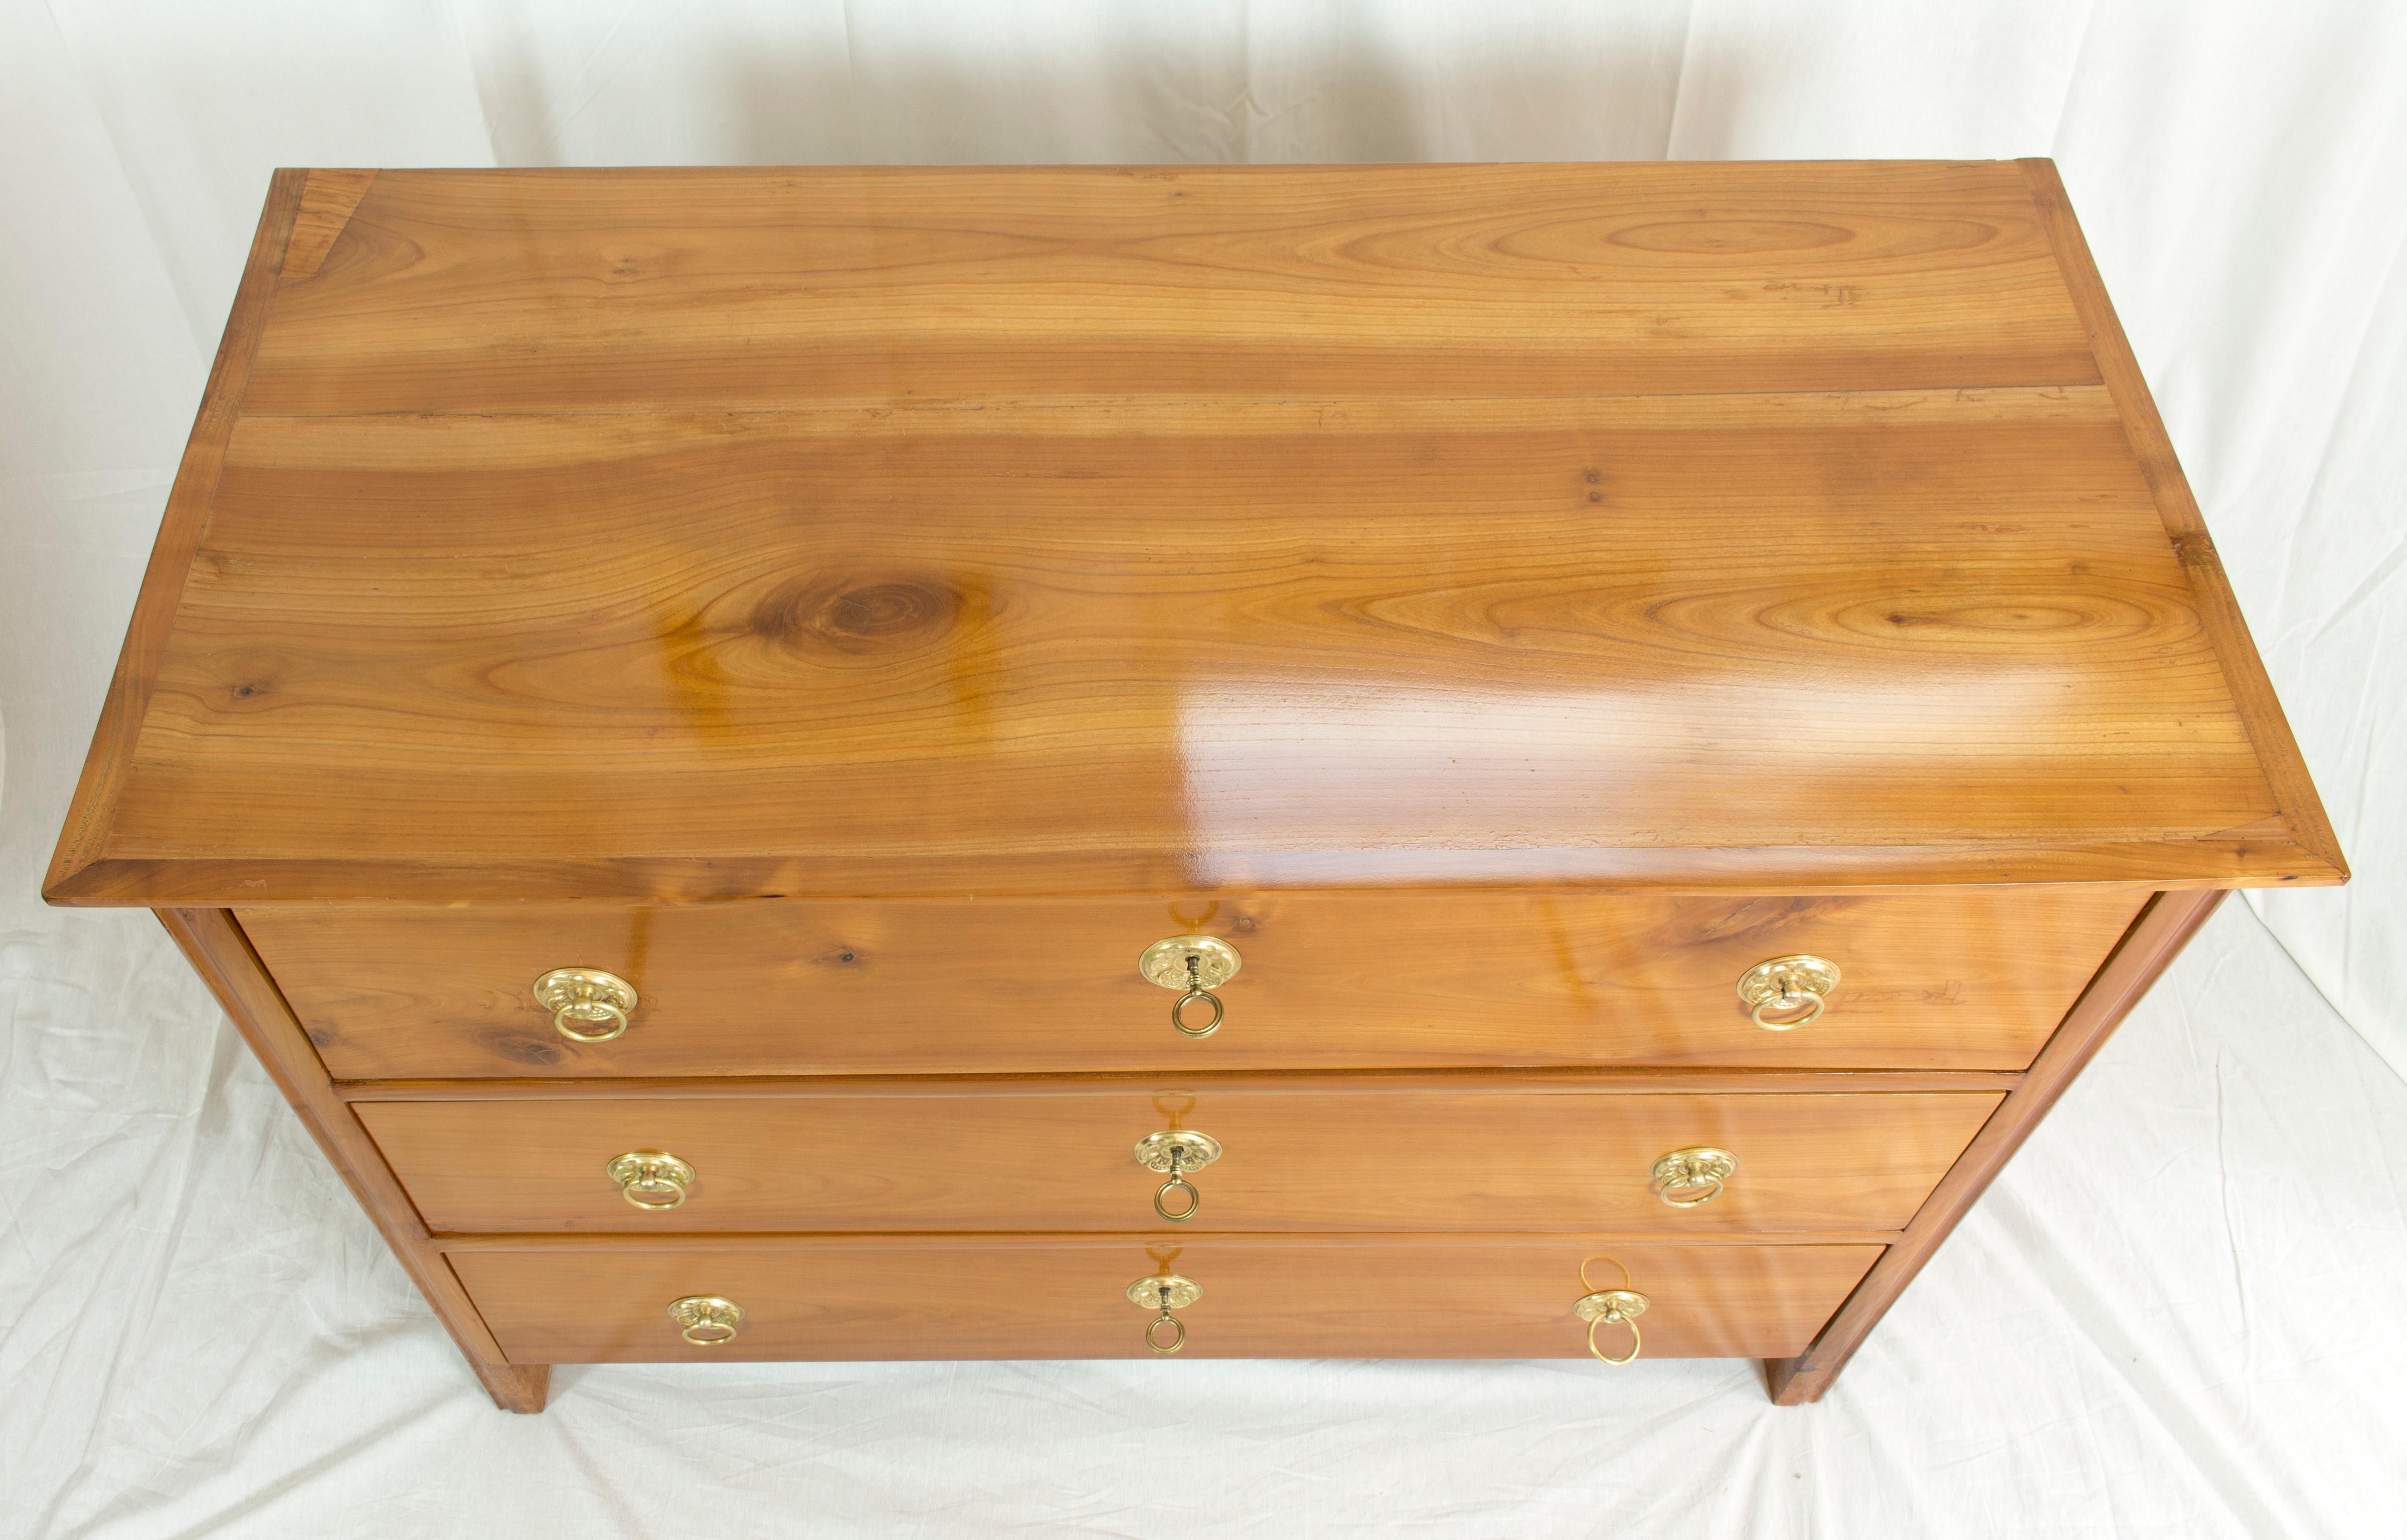 Very beautiful Biedermeier chest of drawers with three drawers. The commode is made of solid cherrywood and dates circa 1825 from Austria. The inside of the drawers is made of spruce wood, as usual. The locks and fittings are original. The fittings